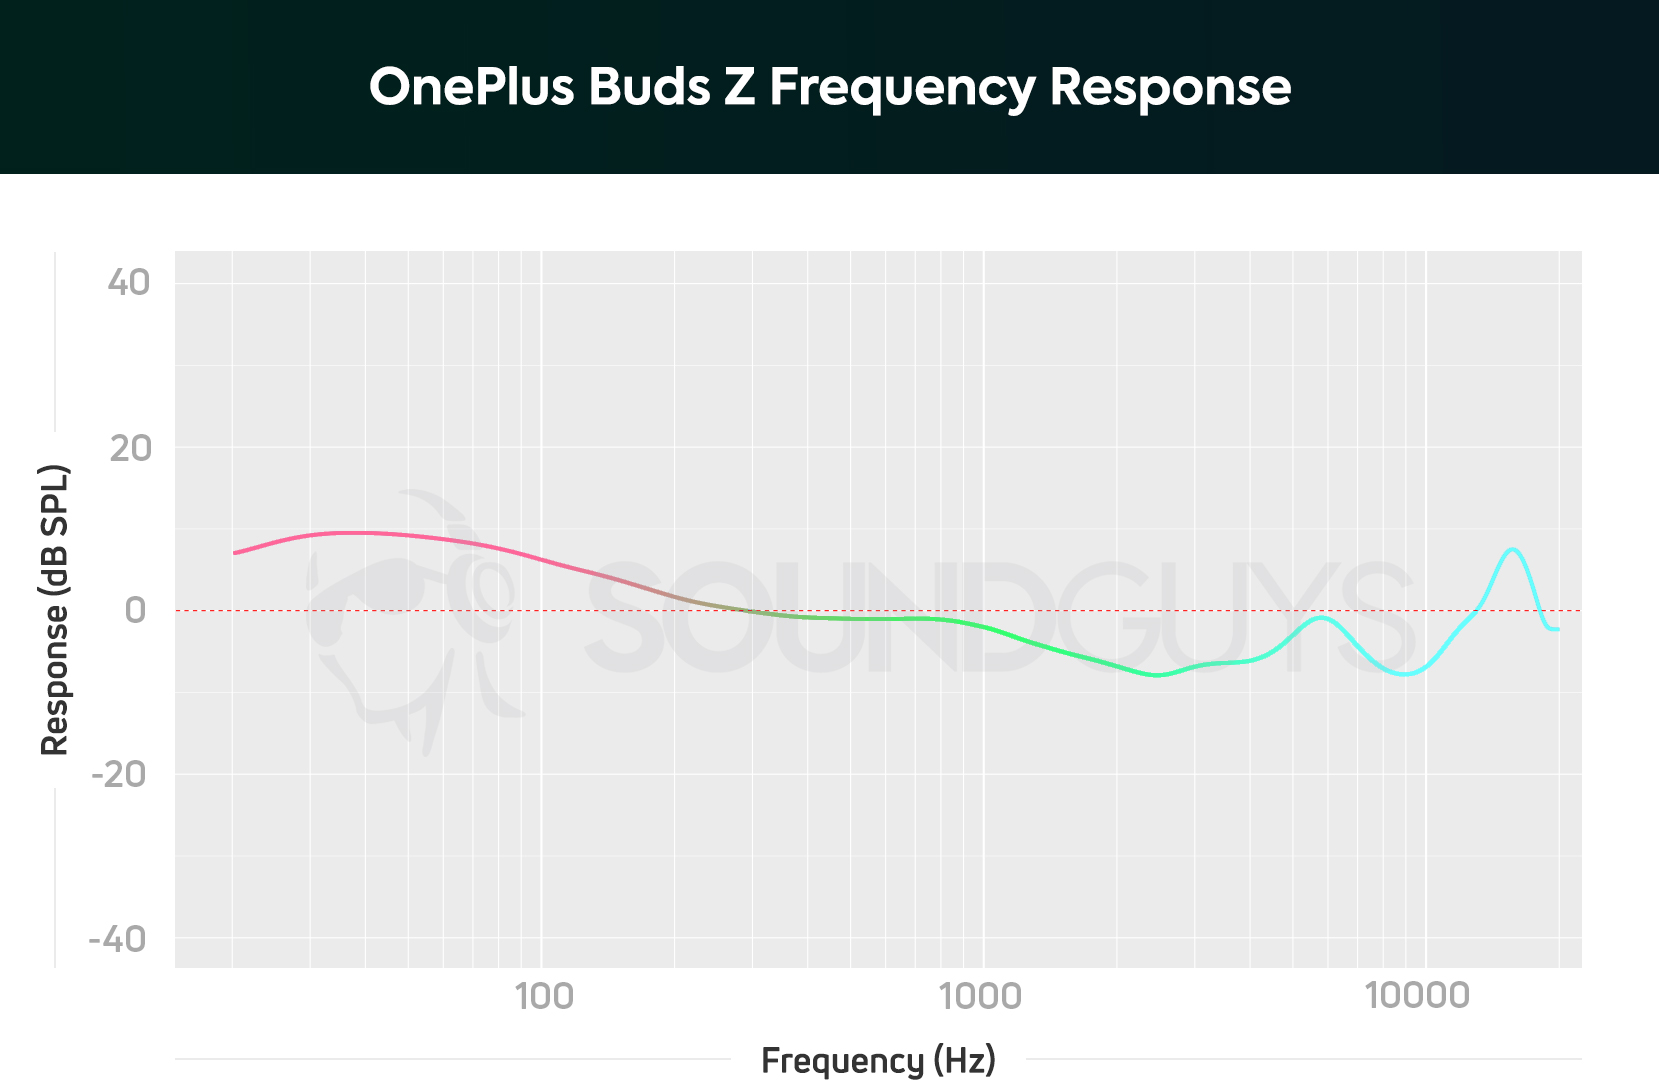 The OnePlus Buds Z true wireless earbuds' frequency response chart, which depicts amplified bass notes that sound twice as loud as midrange notes.